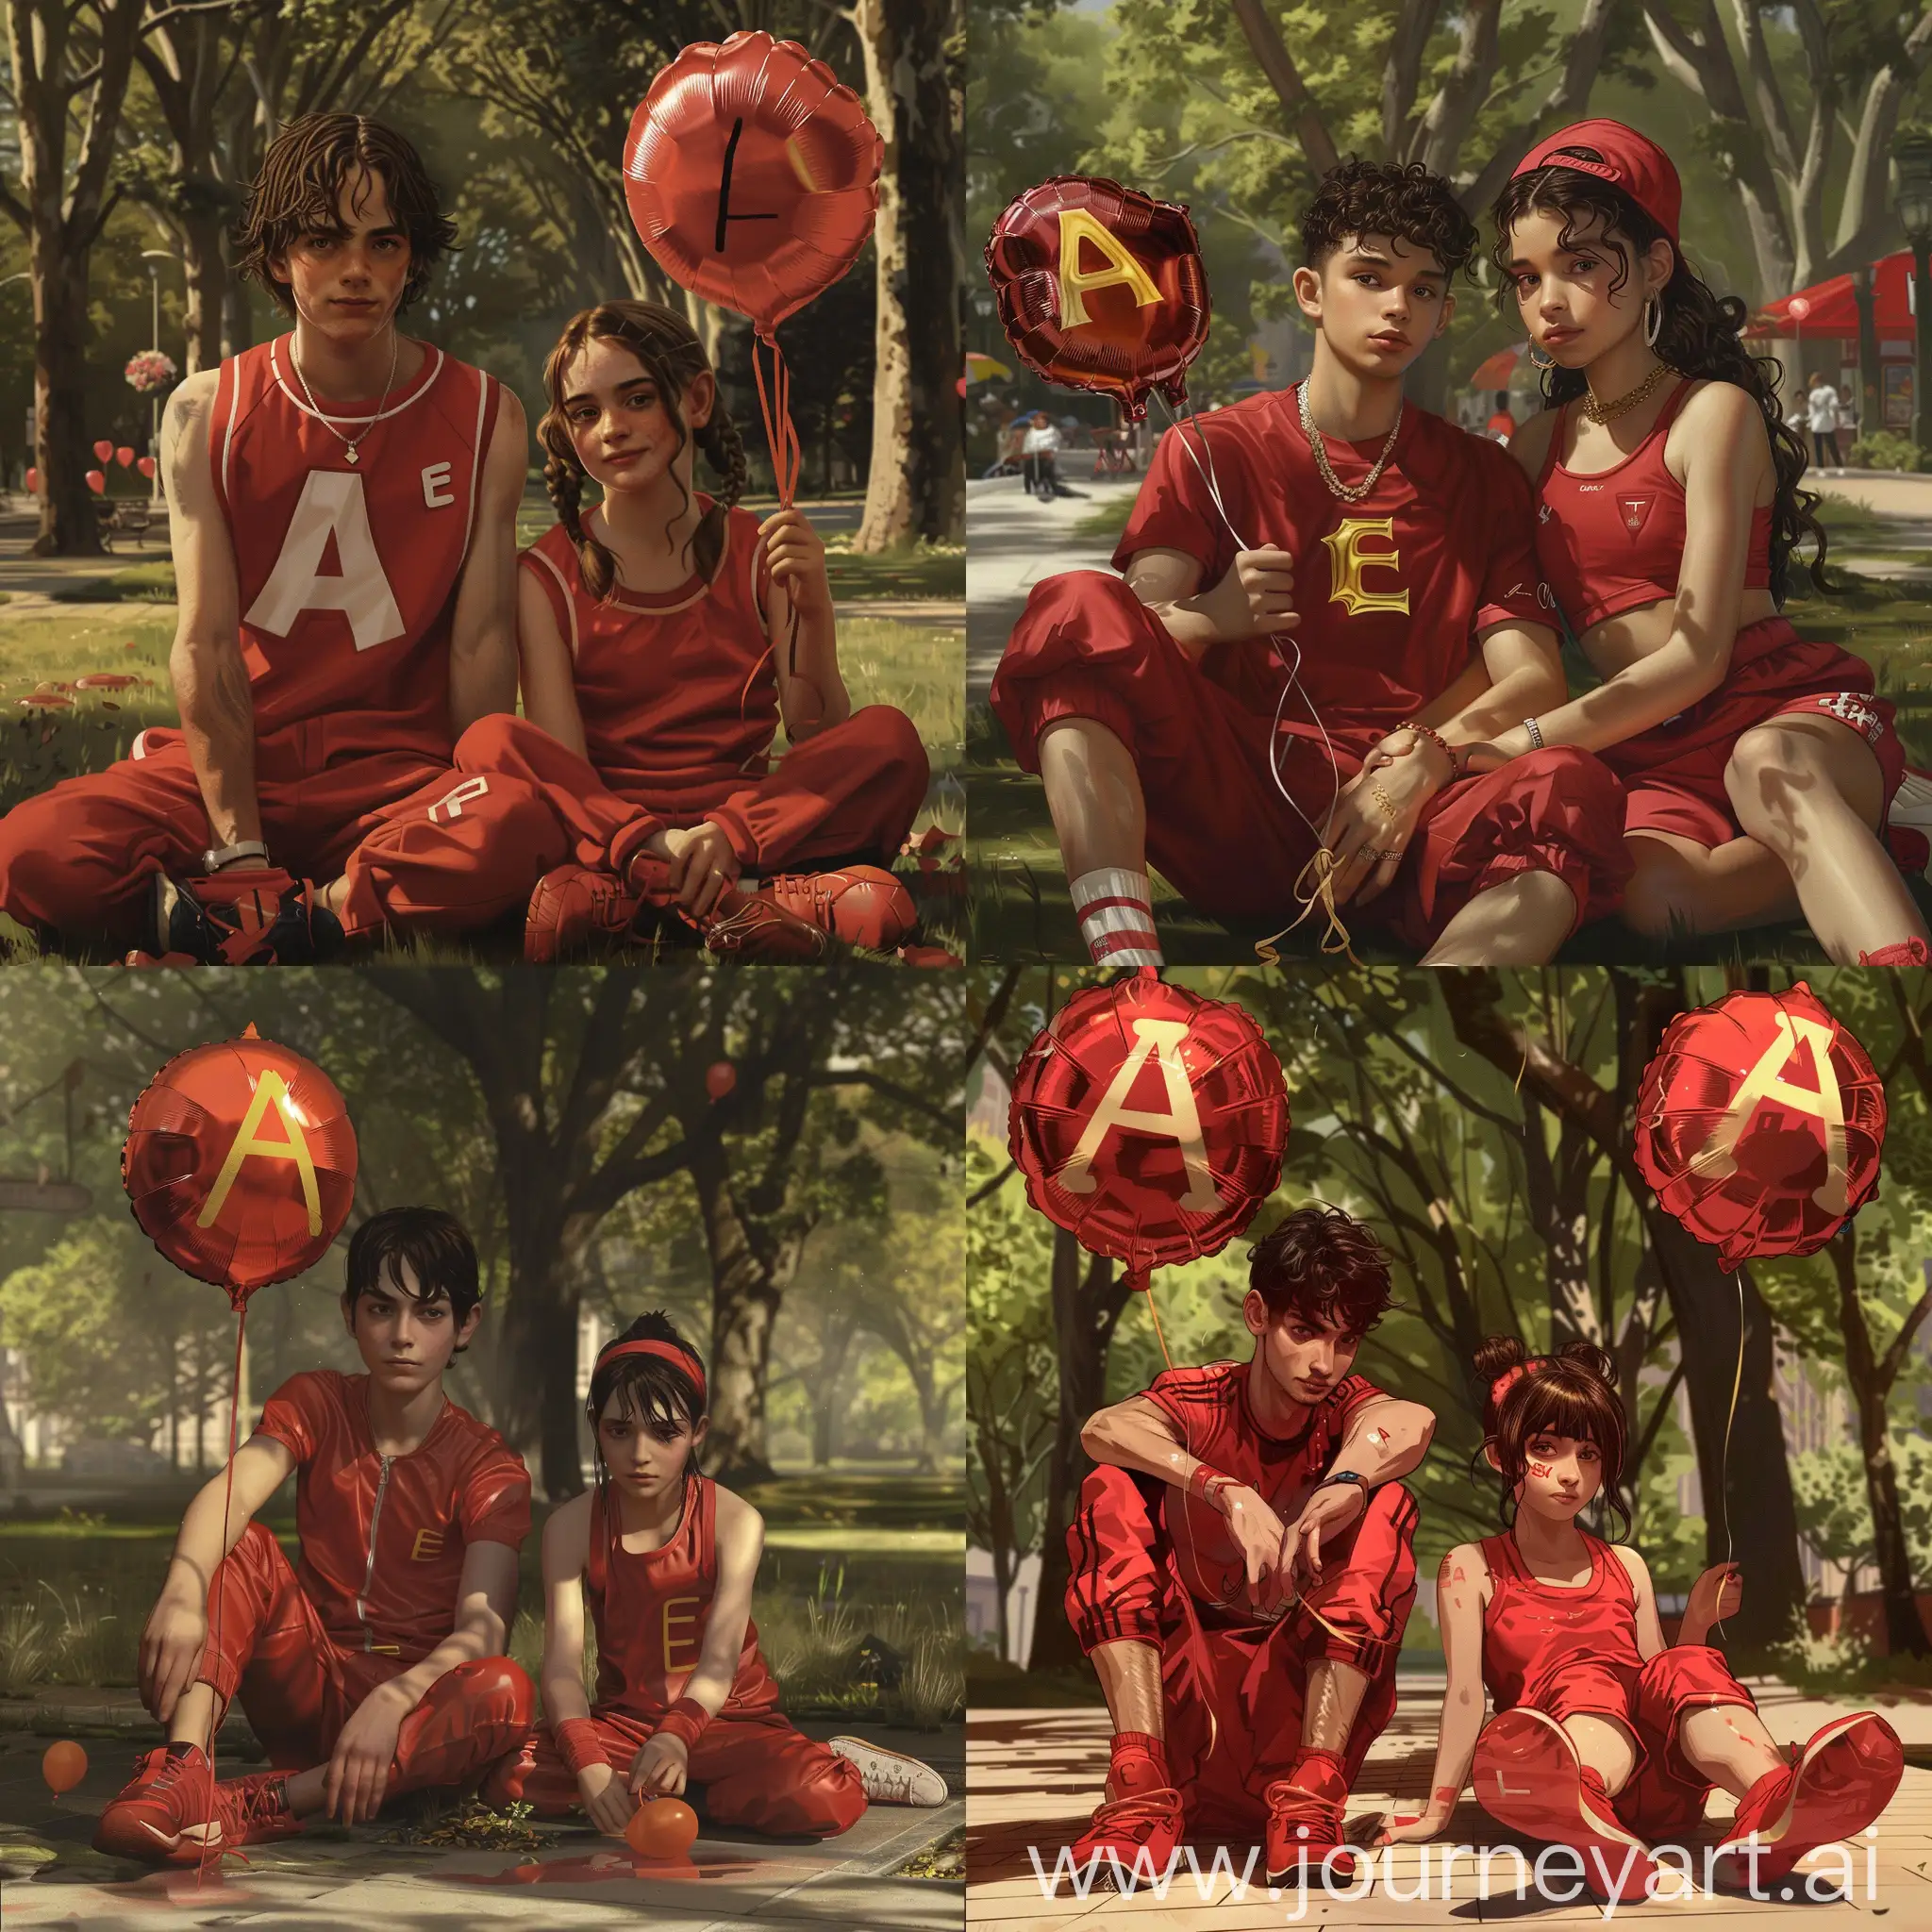 A realistic picture of a young man and a girl sitting in a park. The young man is wearing red sportswear and the girl is wearing red sportswear. The young man is holding a balloon with the letter “A” on it and the girl is holding a balloon with the letter “E” on it.